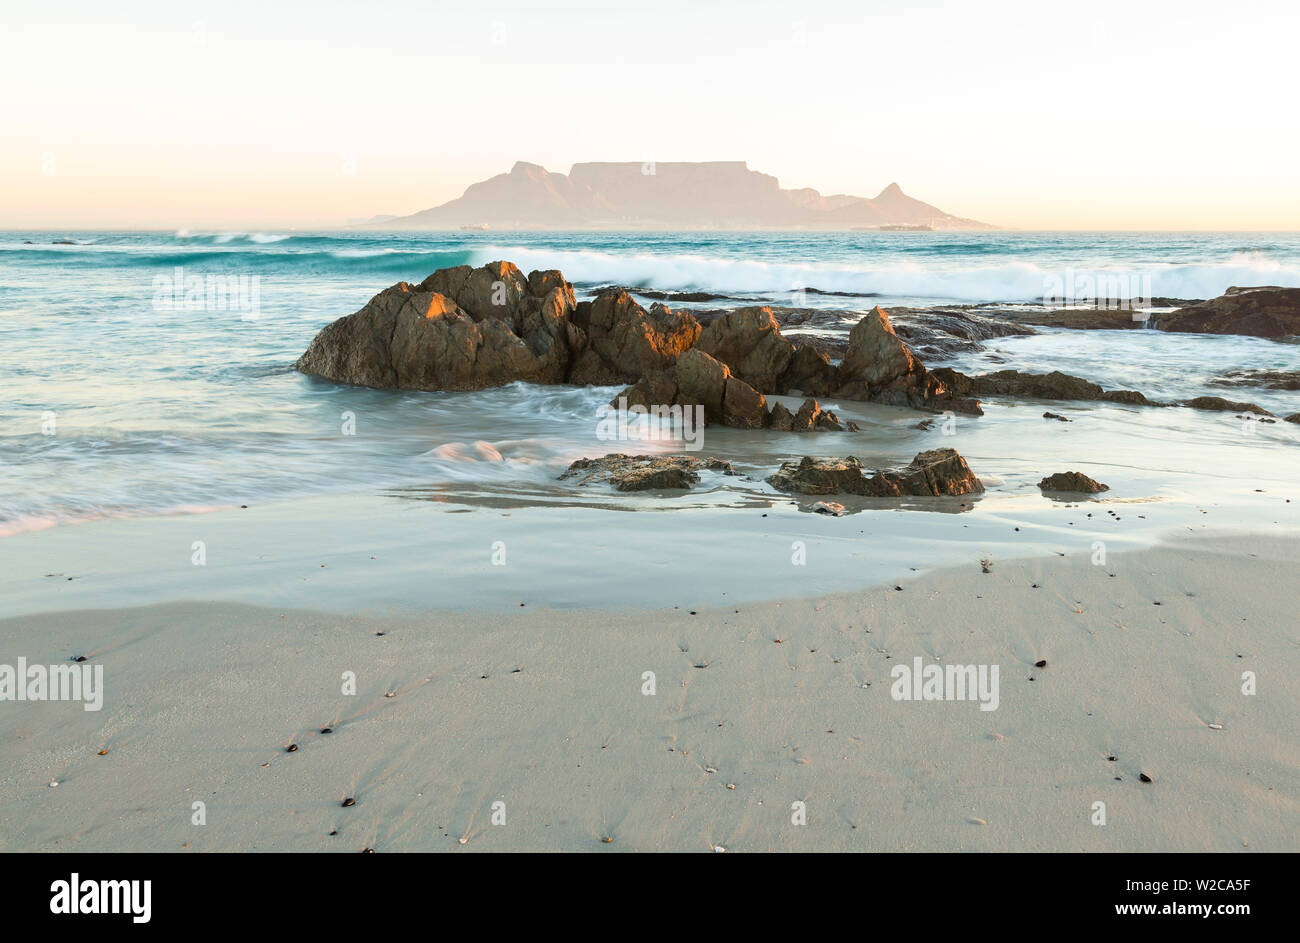 Bloubergstrand beach with Table Mountain in background. Cape Town, Western Cape, South Africa Stock Photo